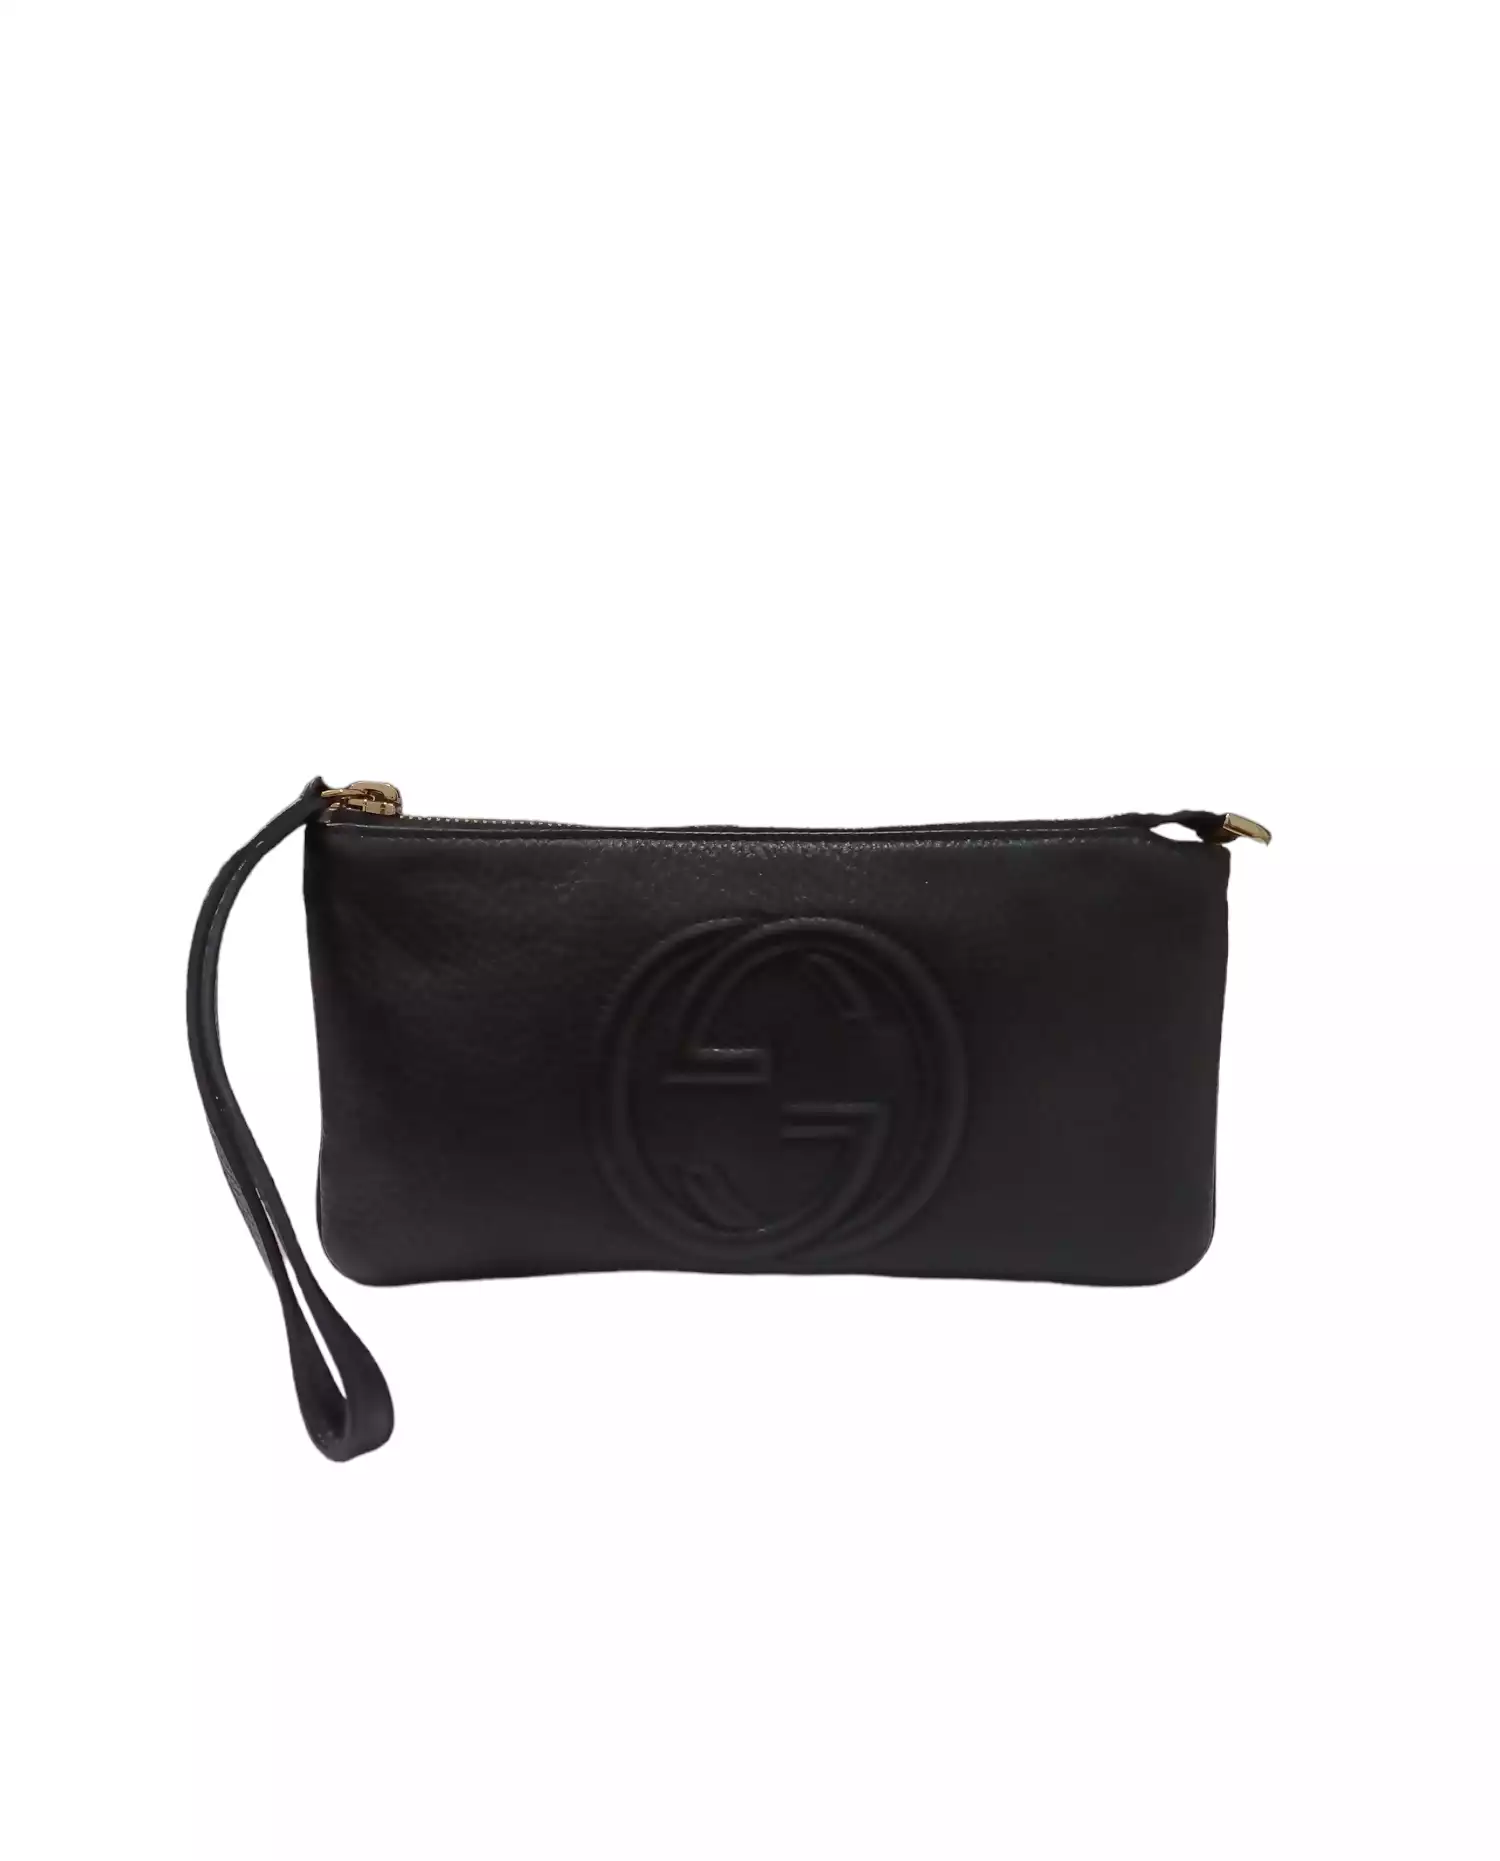 Pouch Bag by Gucci